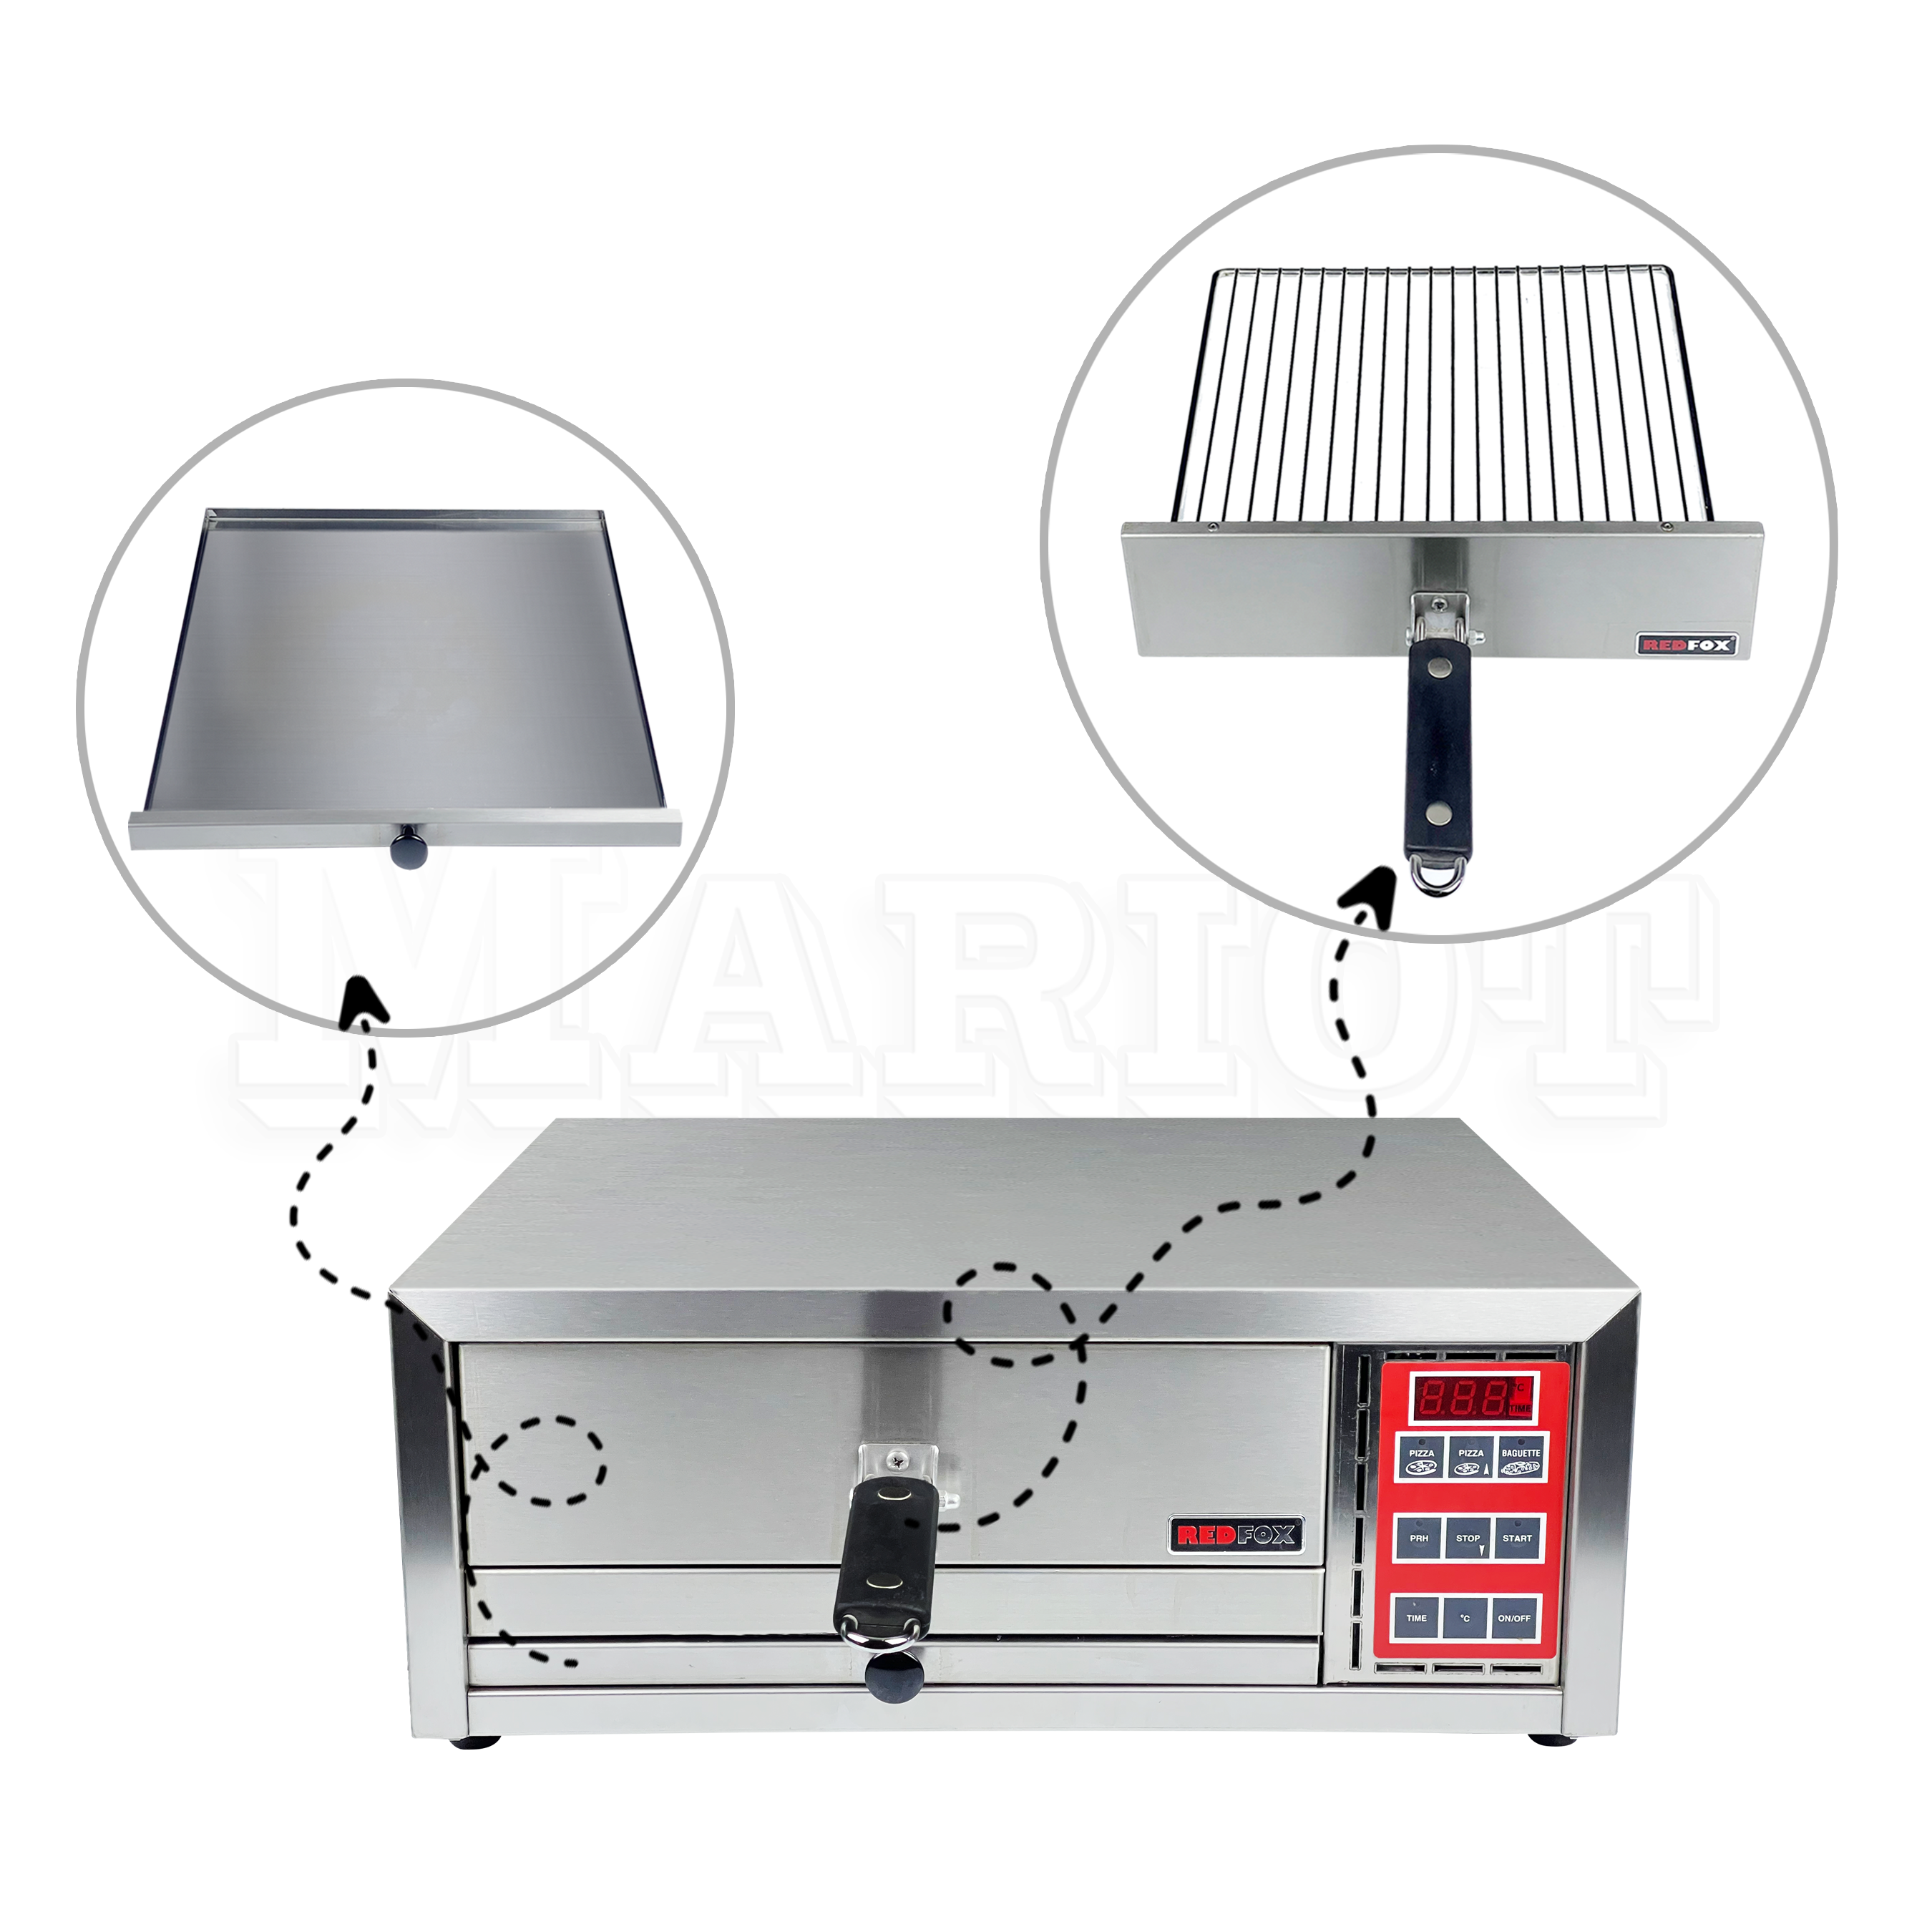 ELECTRIC SNACK OVEN - DIGITAL CONTROL FPP 36